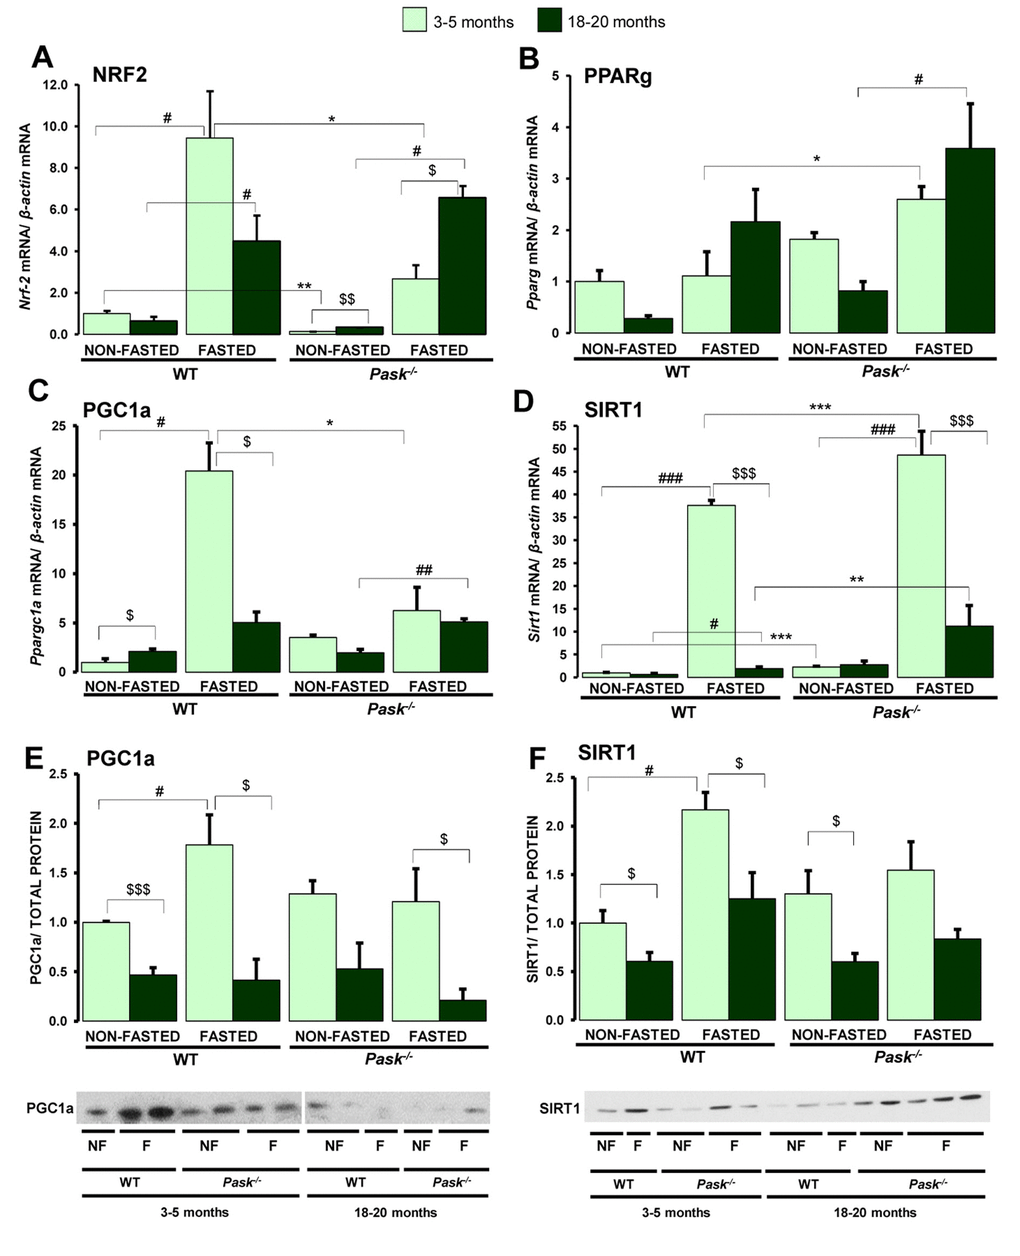 Effects of aging and PASK deficiency on the expression of several hepatic genes involved in mitochondrial biogenesis and PGC1a and SIRT1 proteins. Real-time PCR was used to analyze the expression of Nrf2 (A), Pparg (B), Ppargc1a (C) and Sirt1 (D) genes. The mRNA levels were measured in the livers of non-fasted (NON-FASTED) and 24-h fasted (FASTED) young (3-5 months) and aged (18-20 months) wild-type (WT) and PASK-deficient (Pask-/-) mice. Immunoblot analysis of PGC1a (E) and SIRT1 (F) in livers from young and aged WT and Pask-/- mice. Liver lysates from non-fasted (NF) and 24-h fasted (F) mice were processed for western blot analysis. The value obtained in 3-5-month-old non-fasted WT mice was taken as 1. Bar graphs in (A–D) represent the means ± SEM, and the levels of expression were normalized by mRNA of β-actin used as housekeeping gene;(E, F) represent the means ± SEM of the densitometric values normalized by total protein detected by Stain-Free (TOTAL PROTEIN) (Supplementary Figure 1); n = 4-5 animals per condition. $P $$P $$$P vs. 18-20 months; * P P P vs. Pask-/-; #P ##P ###P vs. fasted.